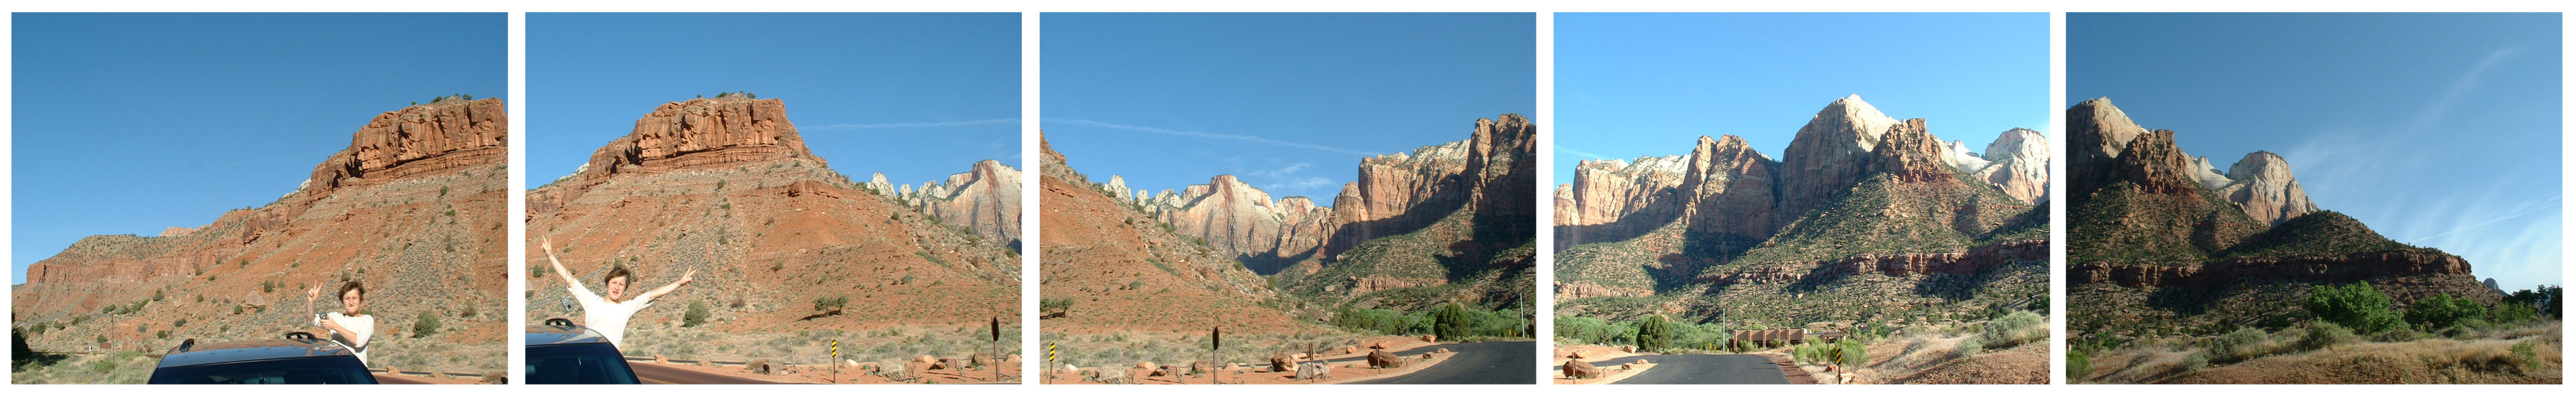 5 images from Zion